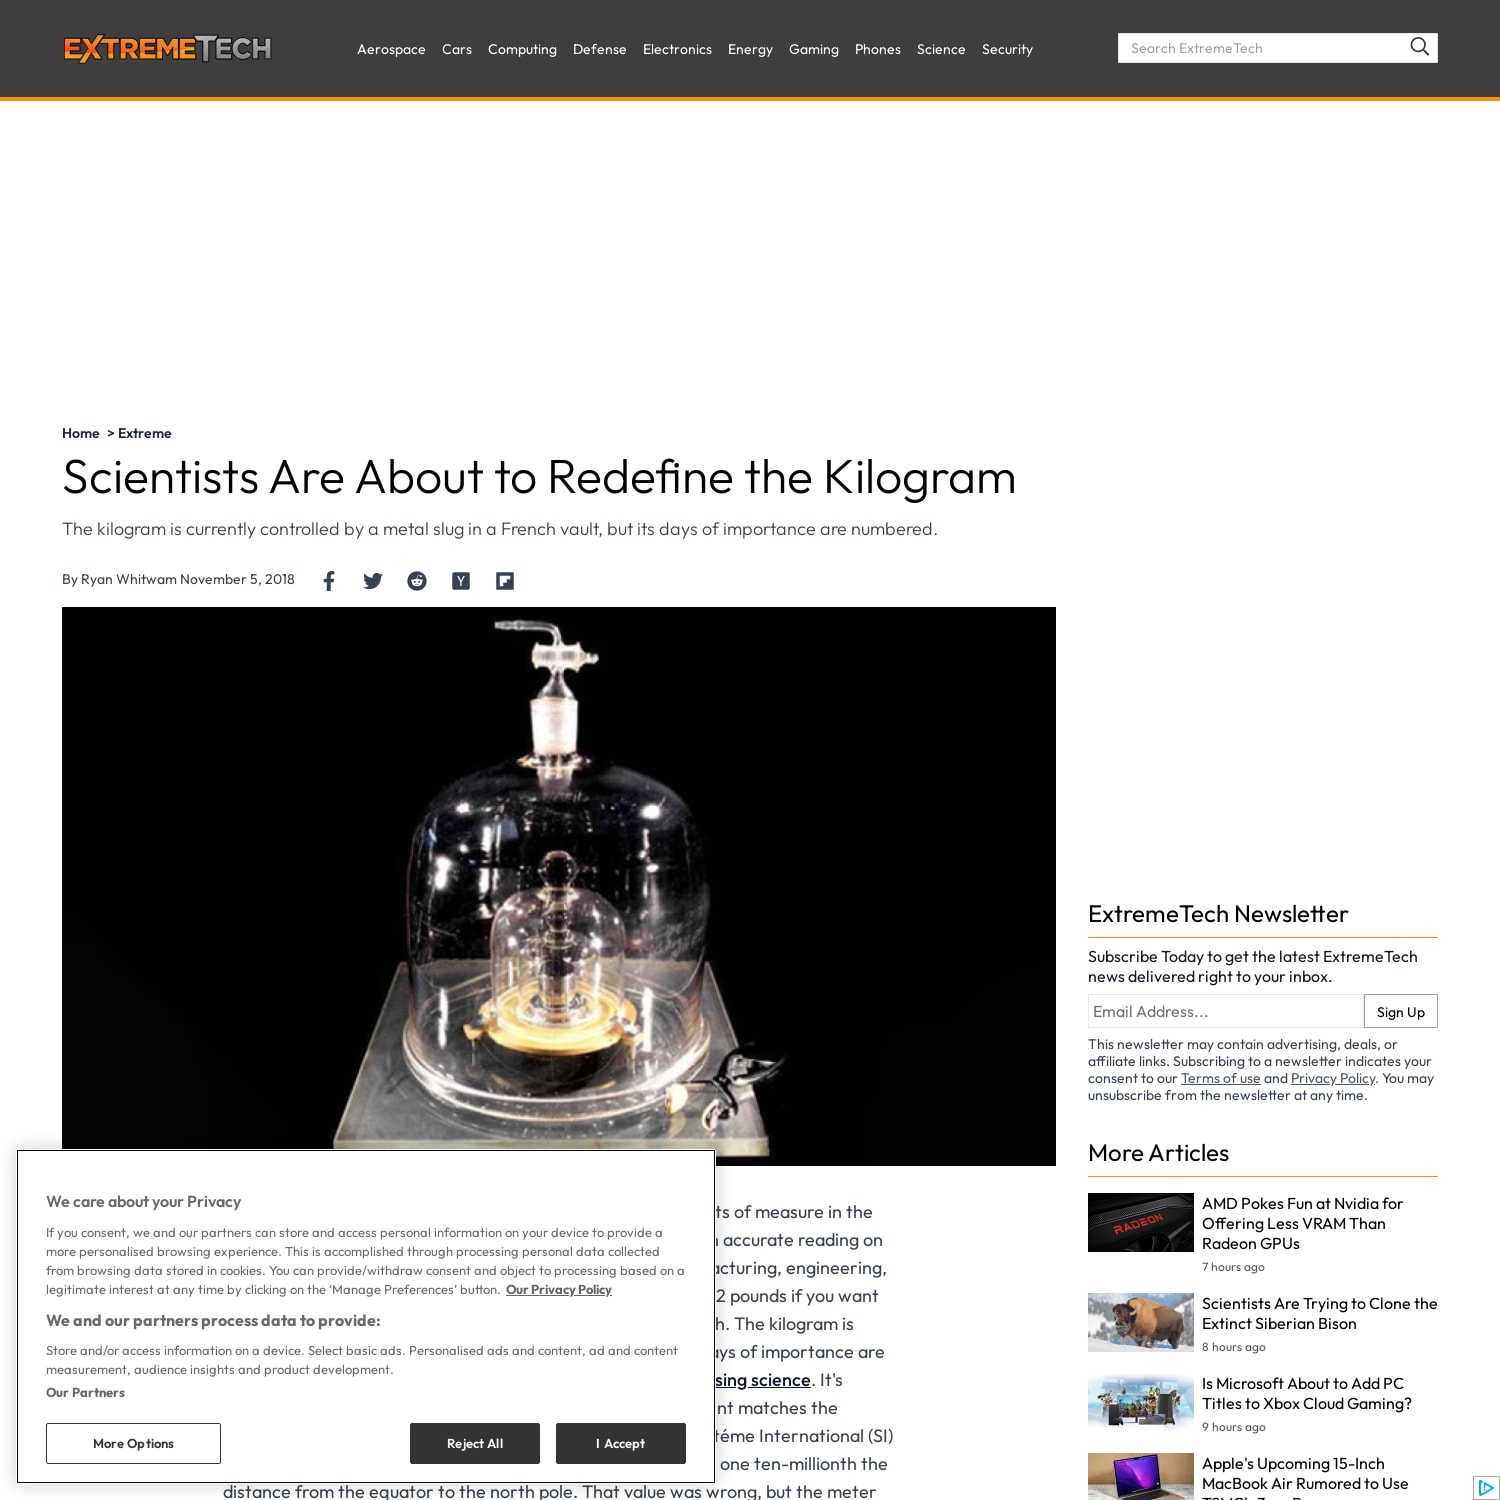 Scientists Are About to Redefine the Kilogram